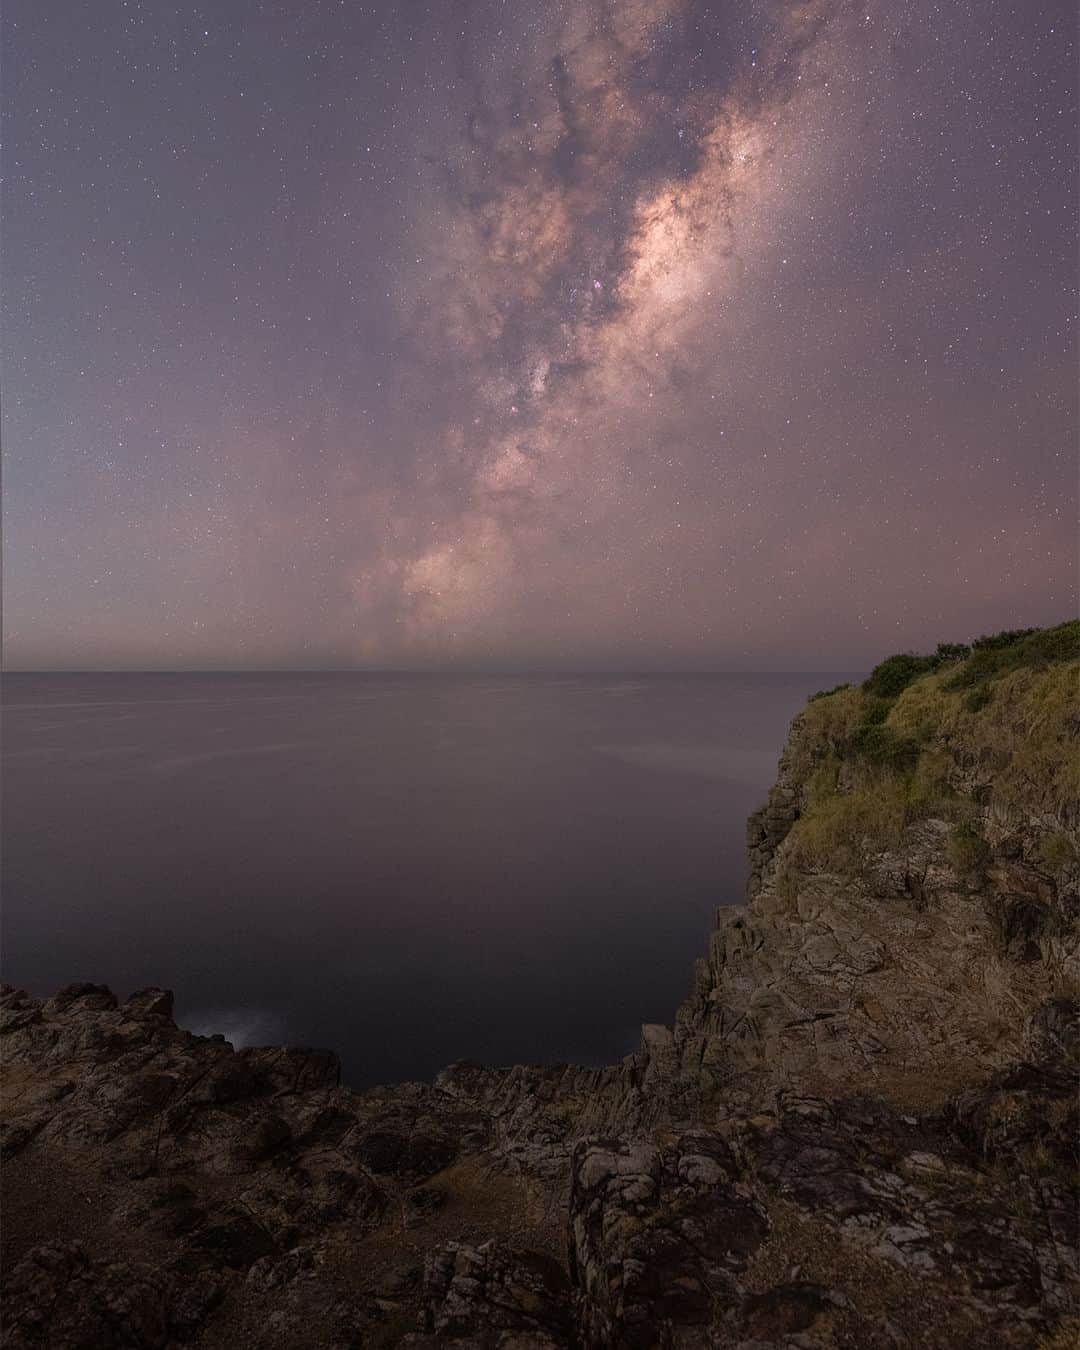 Nikon Australiaのインスタグラム：「@ivan_zafiris' astrophotography journey with his Z 7II and star tracker truly paid off with this mesmerising image of Minnamurra's night sky and rock formations.  "I had visited Minnamurra only once before for some seascape photography that didn't go as planned due to the weather. As a result, I decided to scout the area for potential compositions and planned to return later when the conditions would be more favourable. After scouting for a while, I came across these beautiful rock formations that I thought would look amazing in astrophotography. With that, I marked the position and waited for the right moment.  I didn't have to wait too long because about a week later, the conditions lined up perfectly for astrophotography, and it was also the ideal opportunity to use my star tracker to track the night sky. I made the trip back to Minnamurra and returned to the location I had scouted a week earlier. I set up my Z 7II to capture the foreground using 2-minute exposures to collect as much light and detail as possible. Then, I proceeded to set up my tracker and began tracking the sky.  This was the main reason I switched to the Z 7II, as I wanted to be able to use the extended shutter capabilities in conjunction with the tracker to take long exposures of the night sky. I must say that this combination, along with focusing to infinity, is exactly what I needed for my astrophotography workflow."  Photo by @ivan_zafiris  📸 Z 7II and NIKKOR Z 14-24mm f/2.8 S  #Nikon #NikonAustralia #MyNikonLife #NikonCreators #NIKKOR #NikonZ7II #Z7II #Zseries #LandscapePhotography #AstroPhotography #Australia」